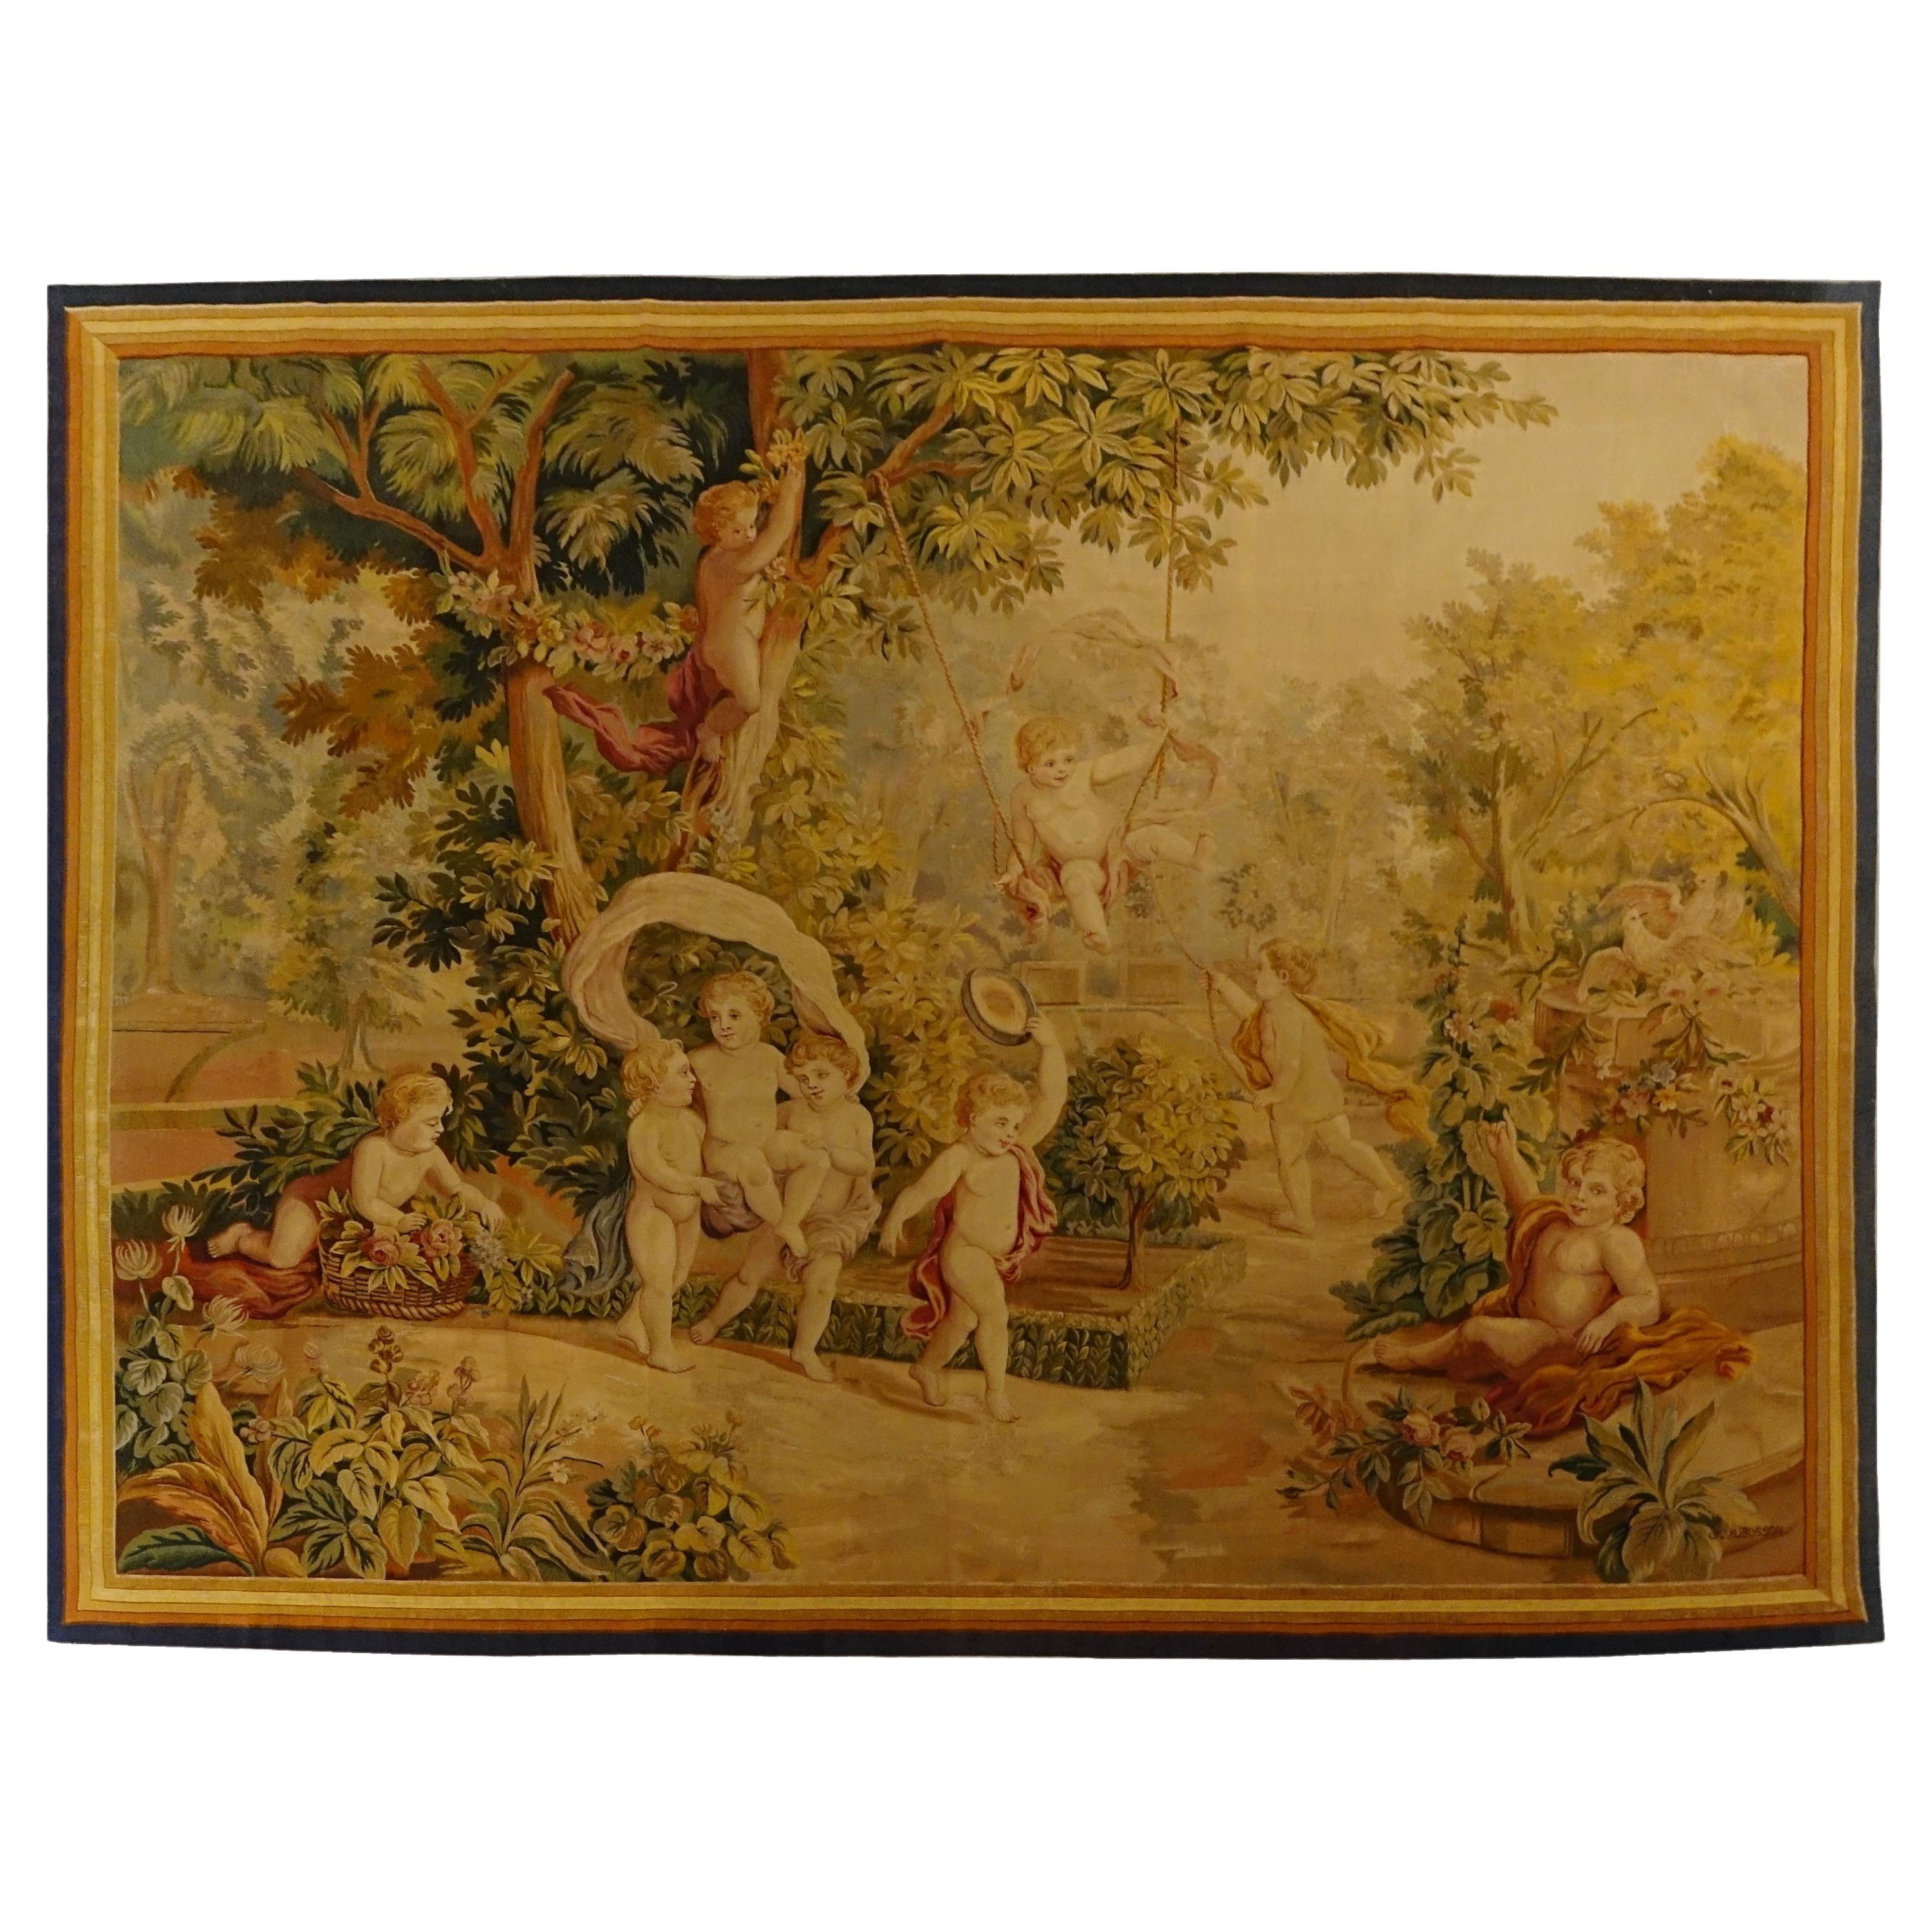 Wall Decor Vintage French Tapestry Wall Hanging 89 x 75 cm Antique French Tapestry Pictorial French Tapestry Wall Hanging